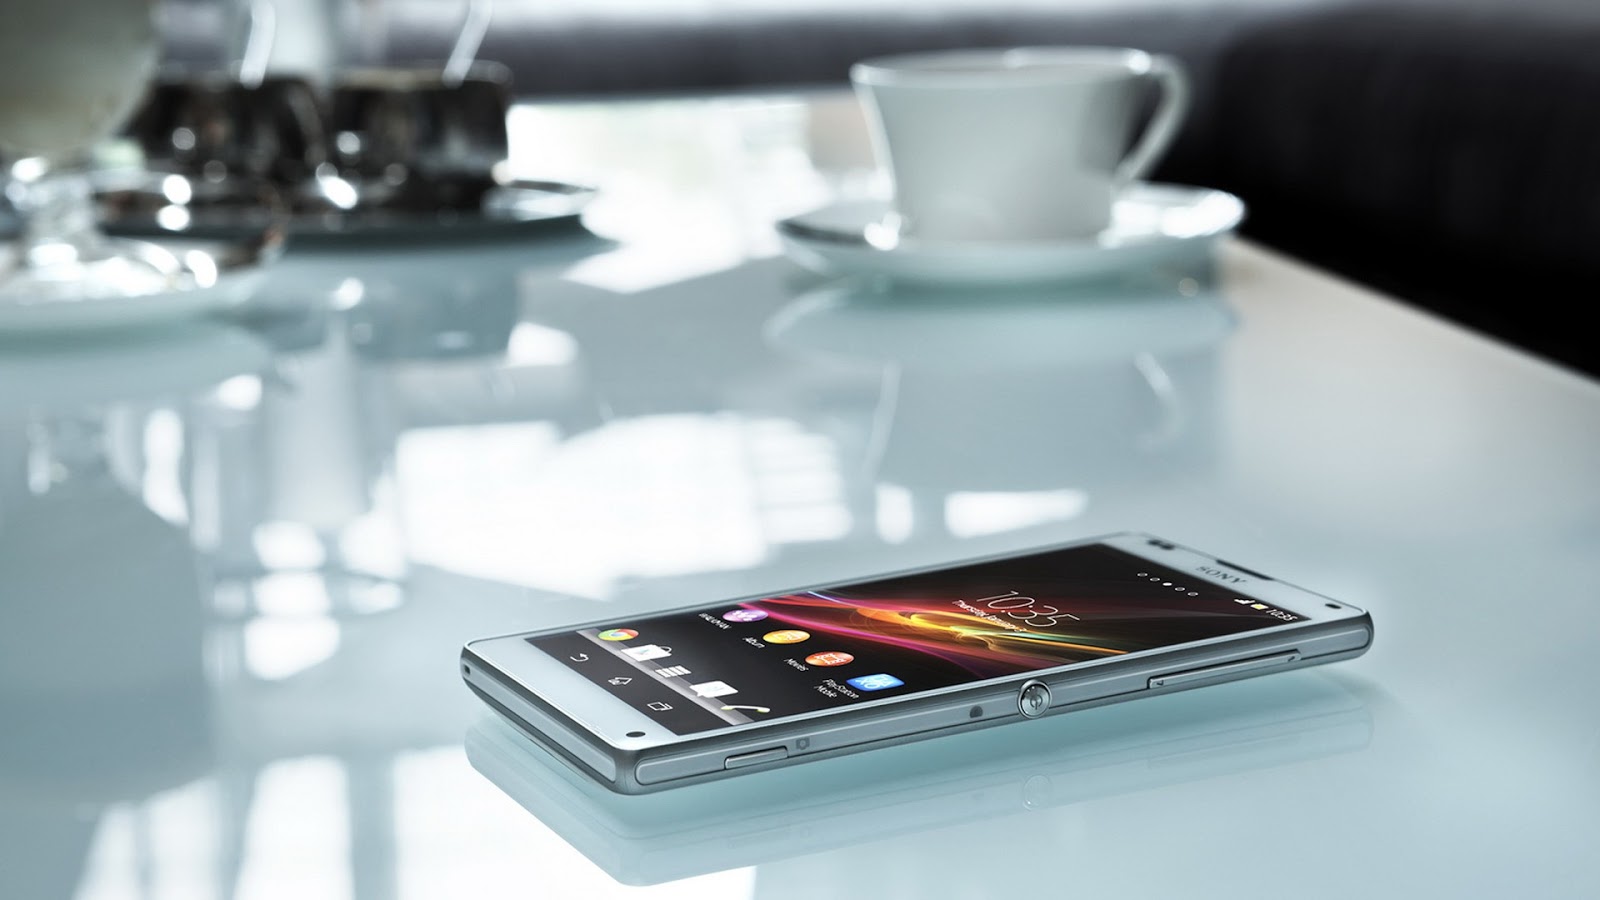 Sony Xperia Z – Experience the best of Sony in a smartphone :